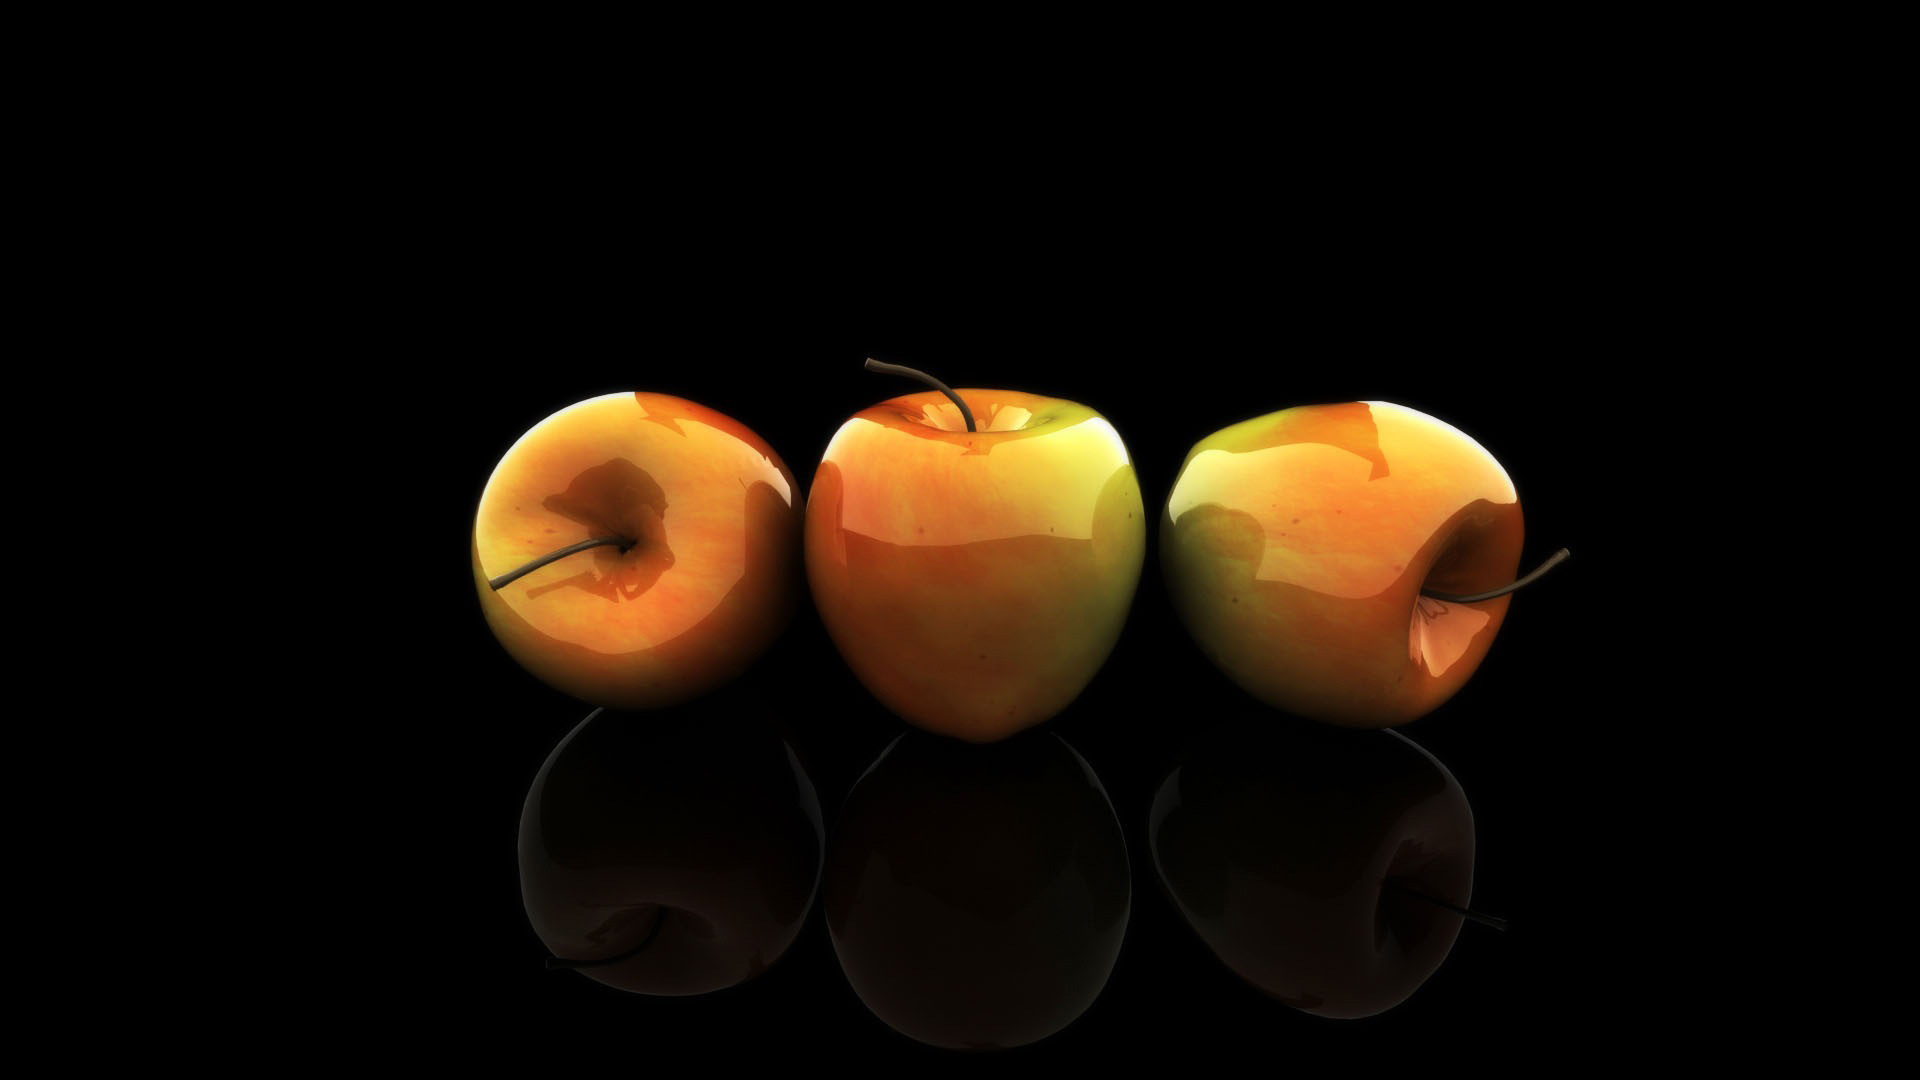 Golden Apples Desktop HD Wallpaper And Make This For Your